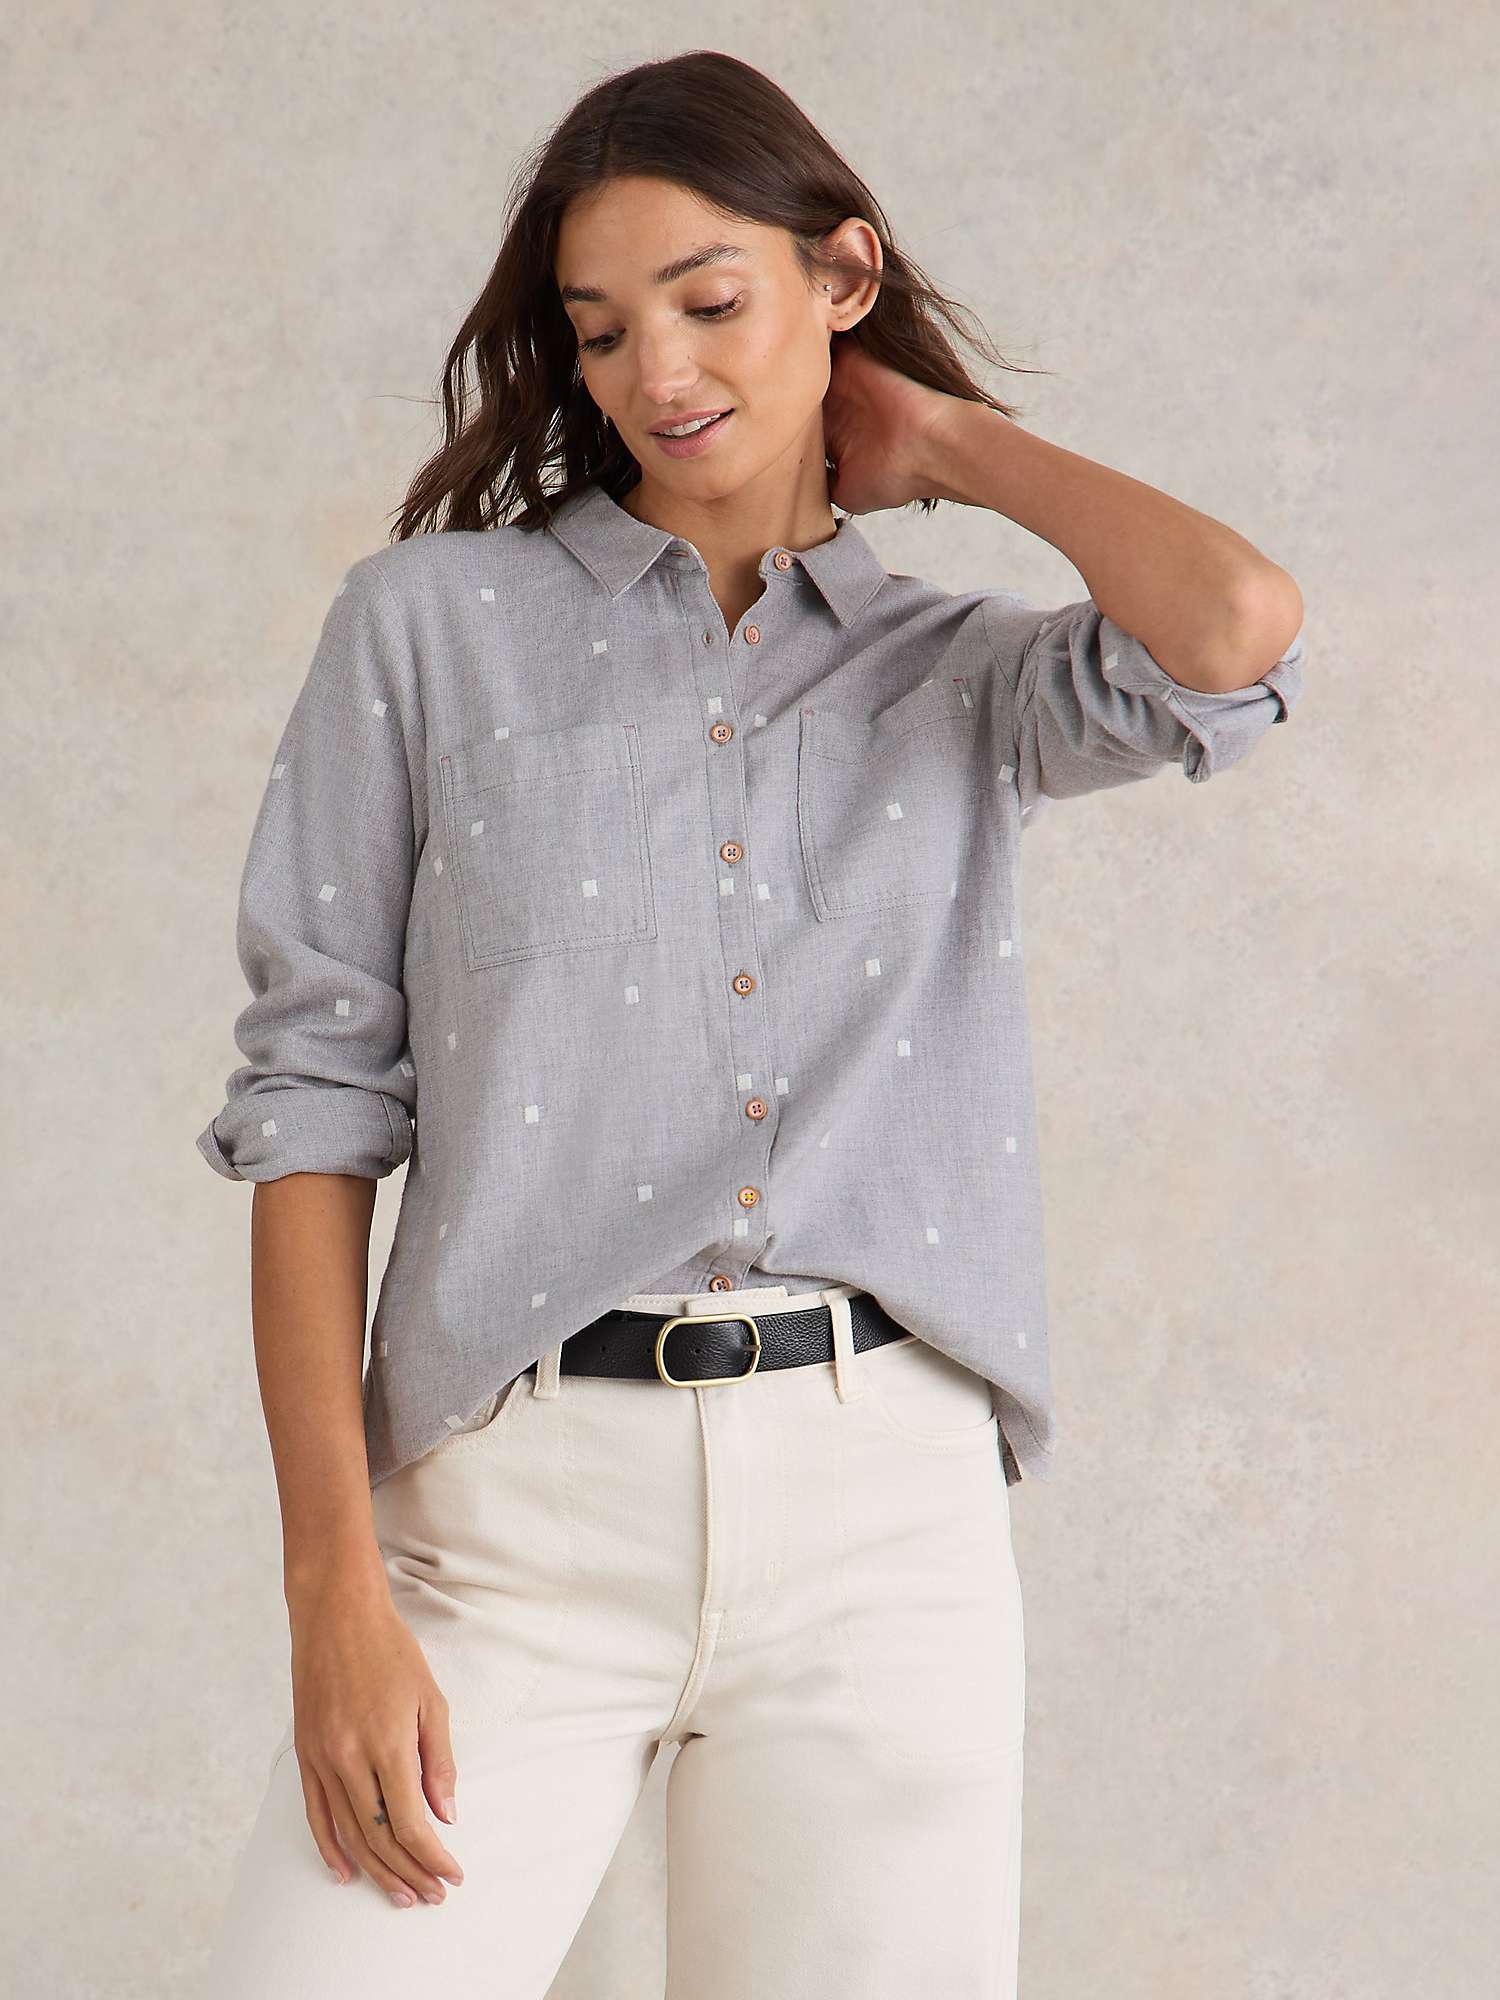 Buy White Stuff Square Embroidery Organic Cotton Shirt, Grey/White Online at johnlewis.com